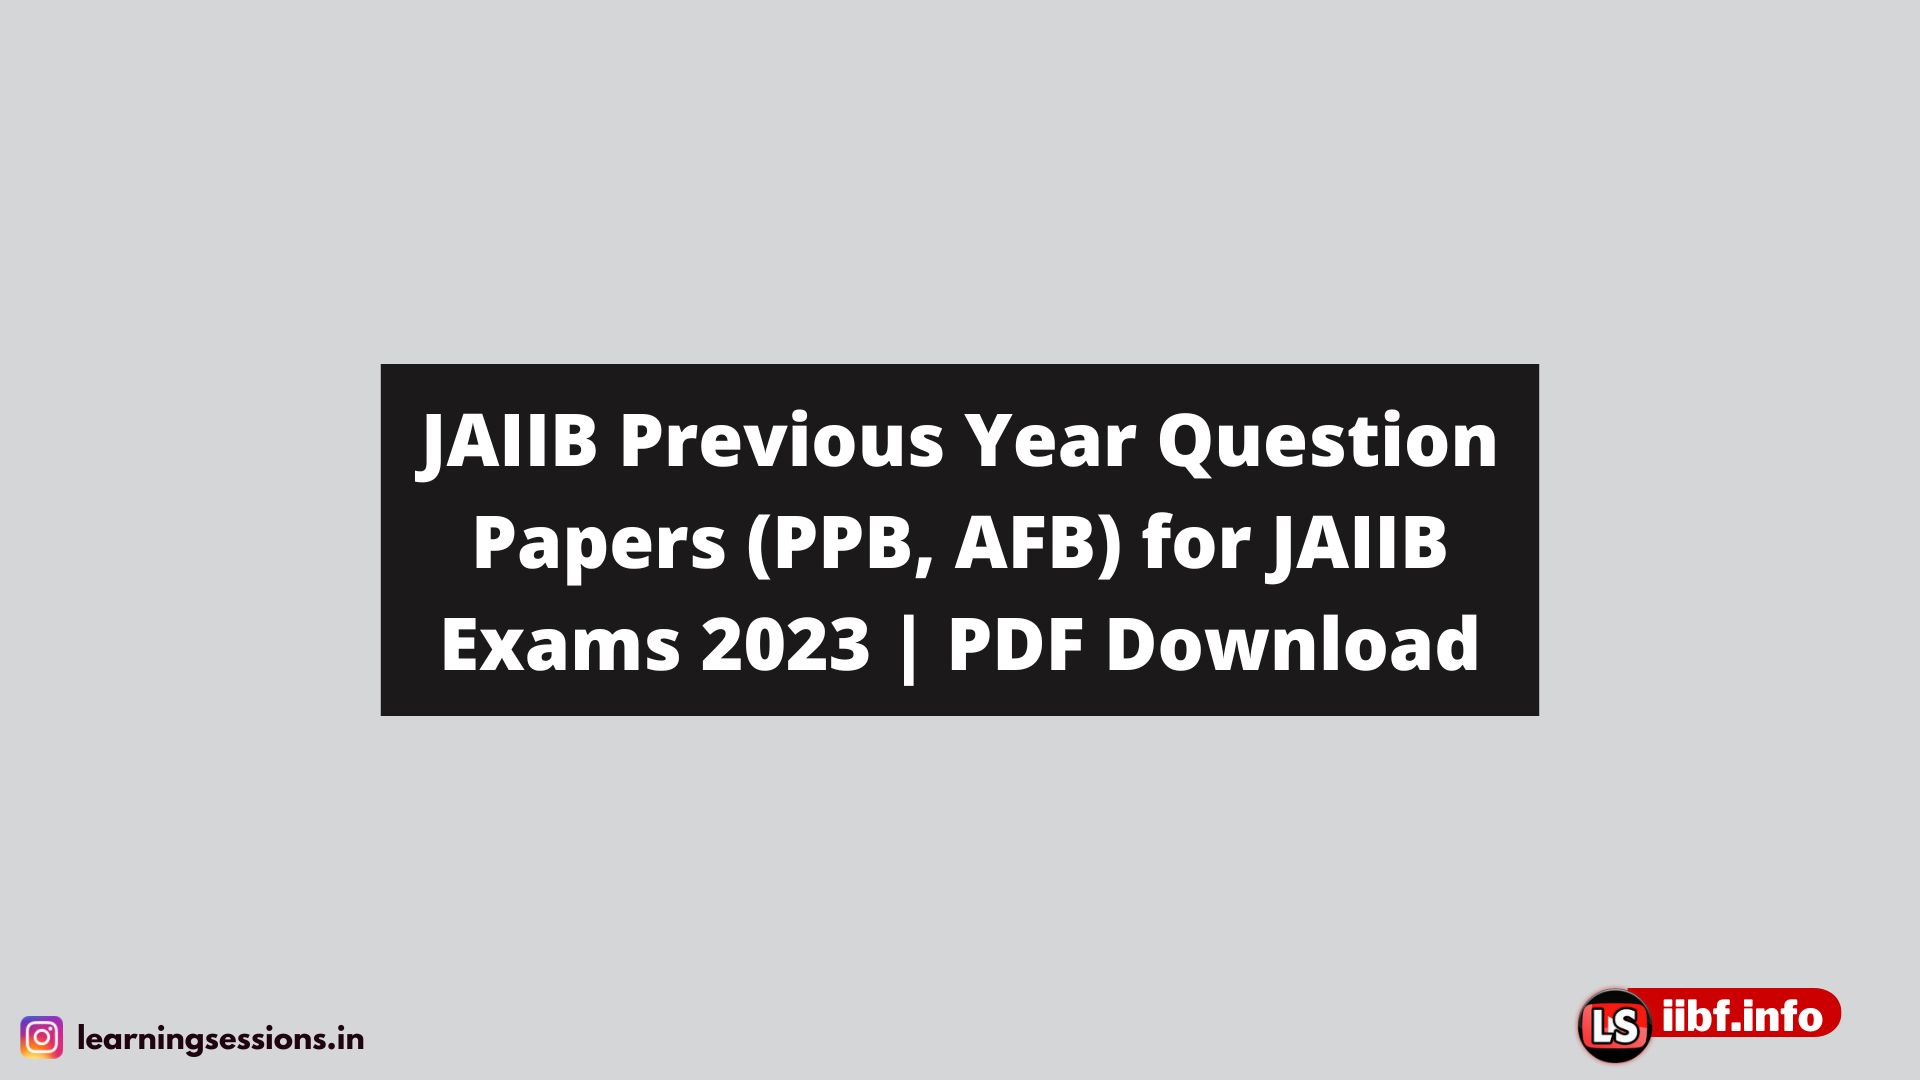 JAIIB Previous Year Question Papers (PPB, AFB) for JAIIB Exams 2023 | PDF Download